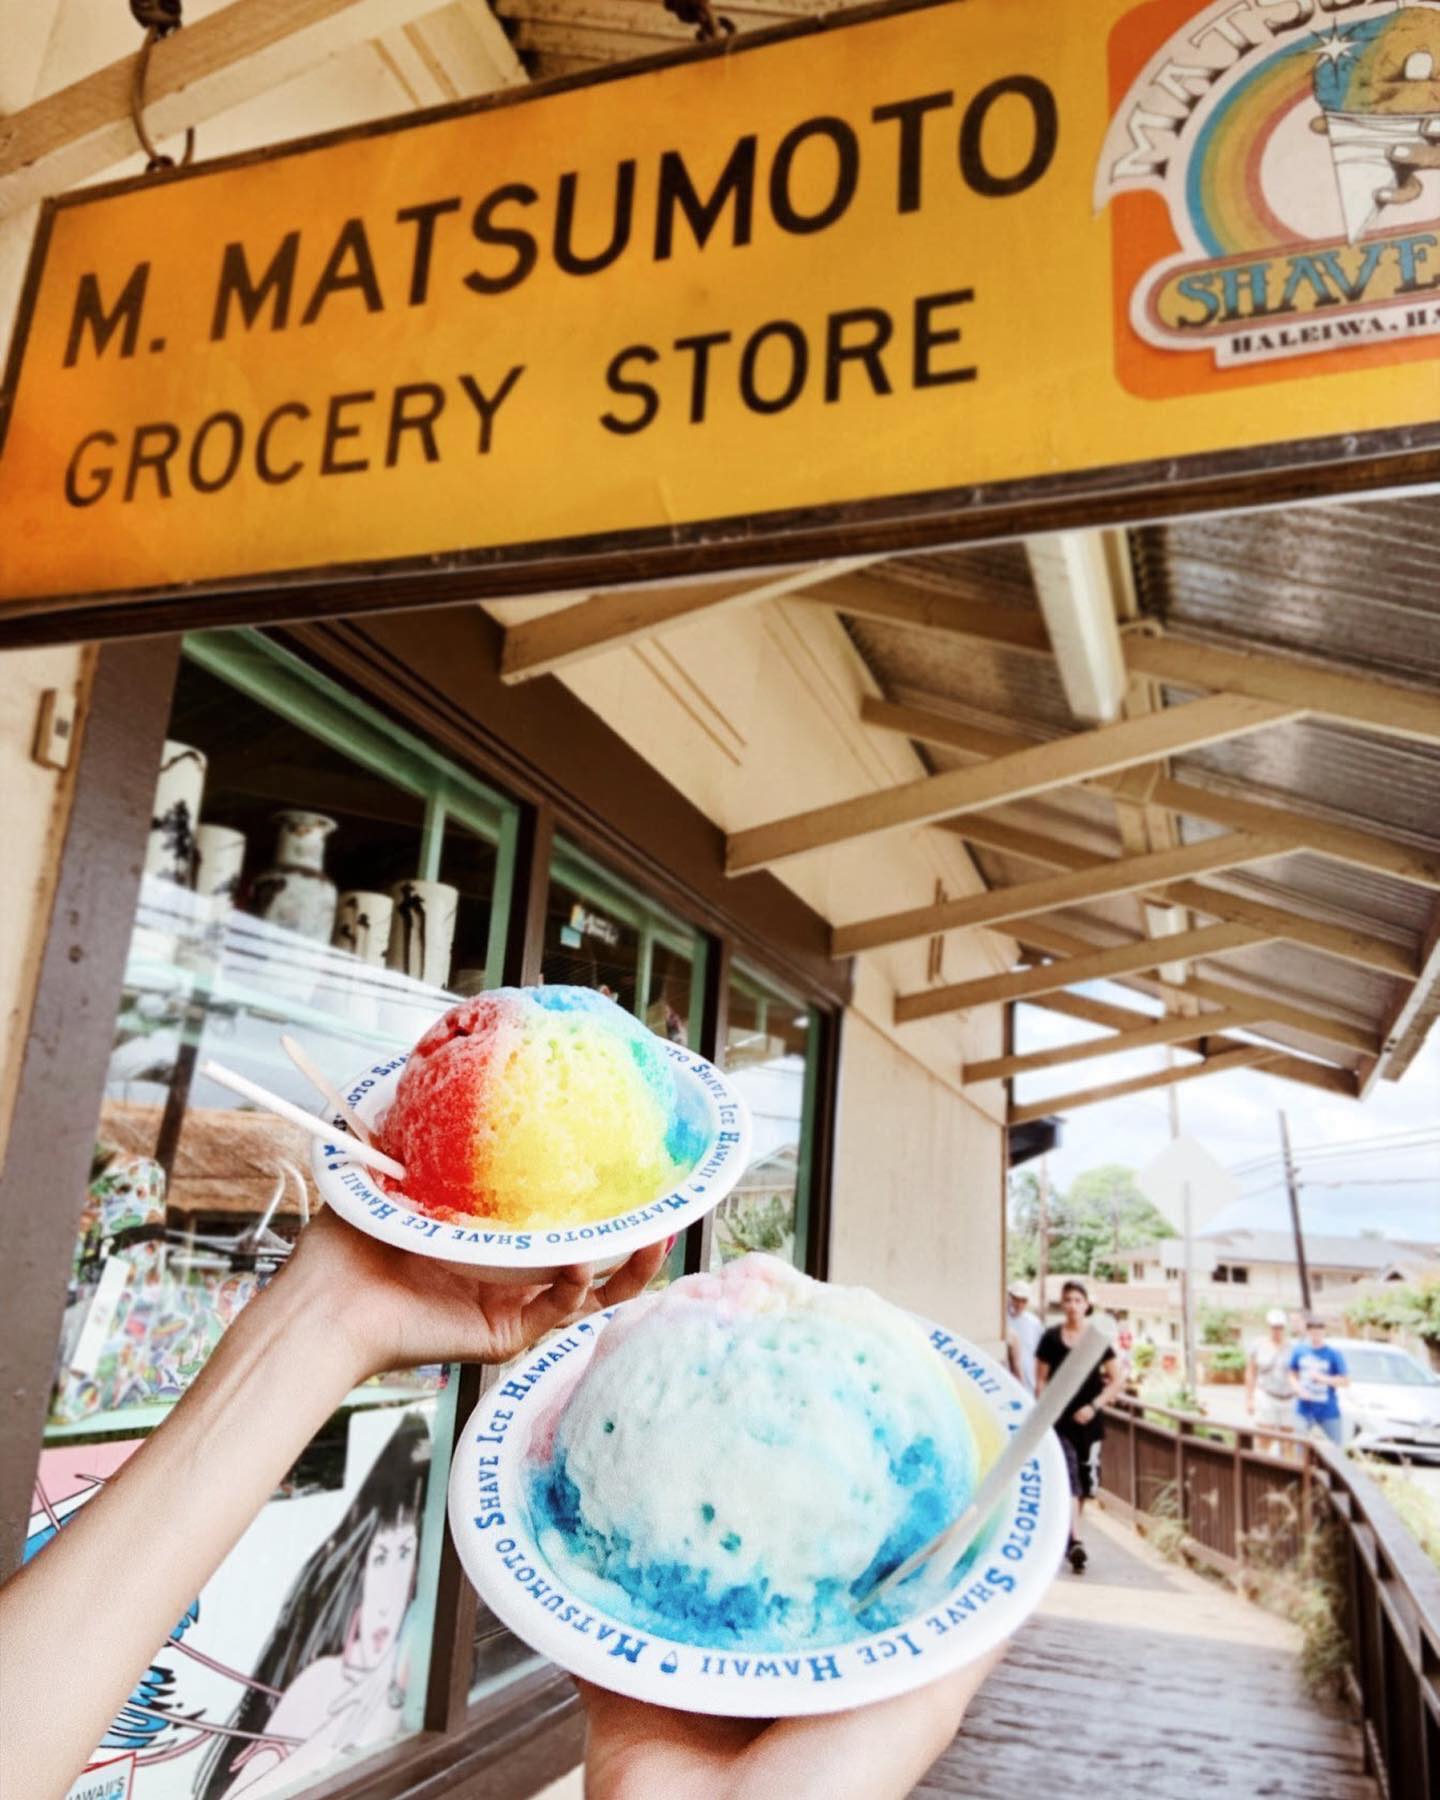 Photo of 2 bowls of Matsumoto shave ice taken in from of M. Matsumoto entrance sign. One of the 5 things to do with your children 